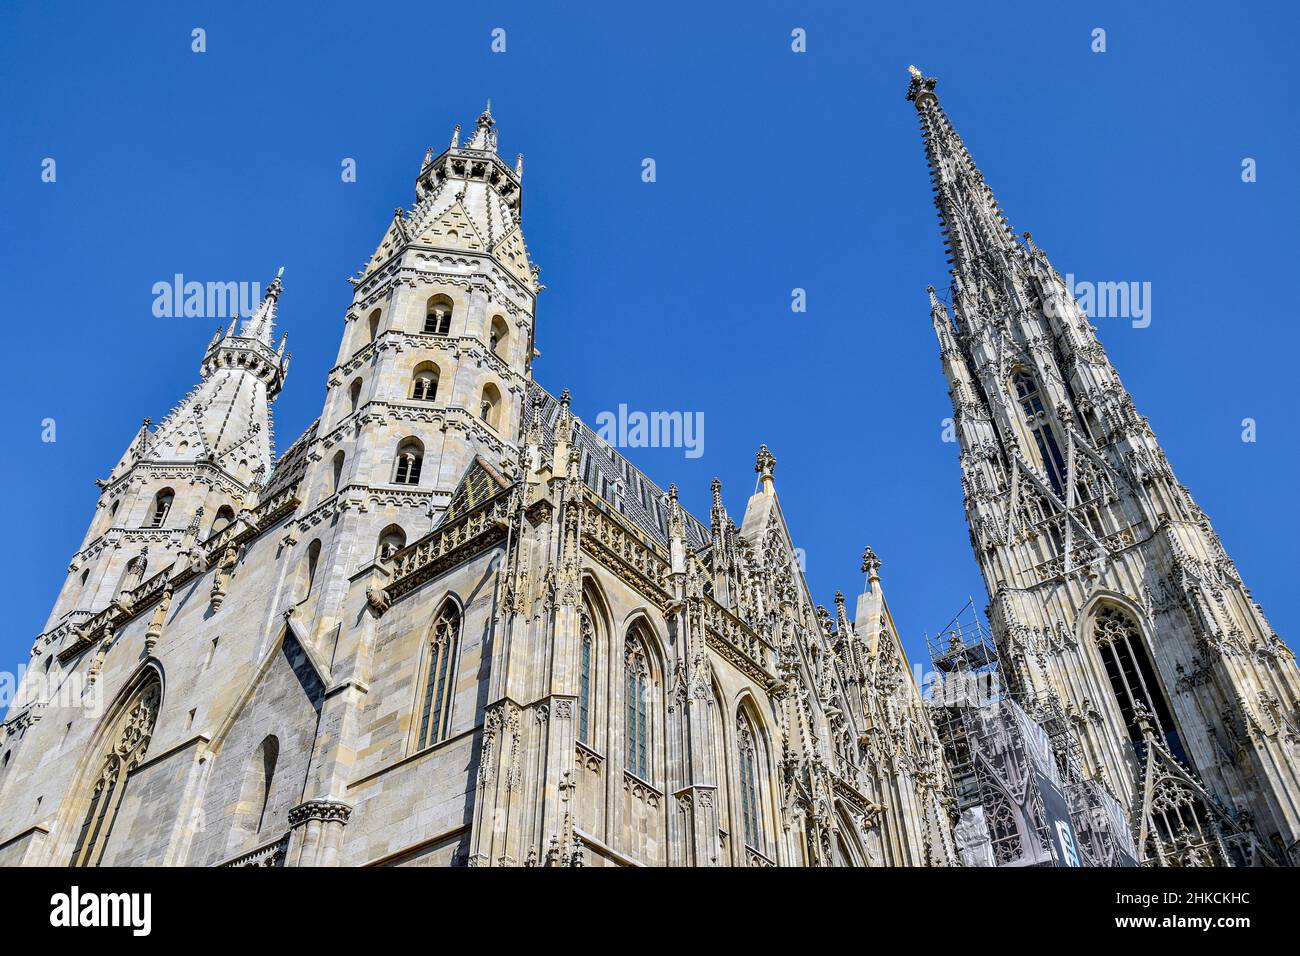 Vienna, Austria, may 2019: Details of the roof and tower of the Stephansdom -St Stephen's church view against blue sky, one of the main tourist destin Stock Photo